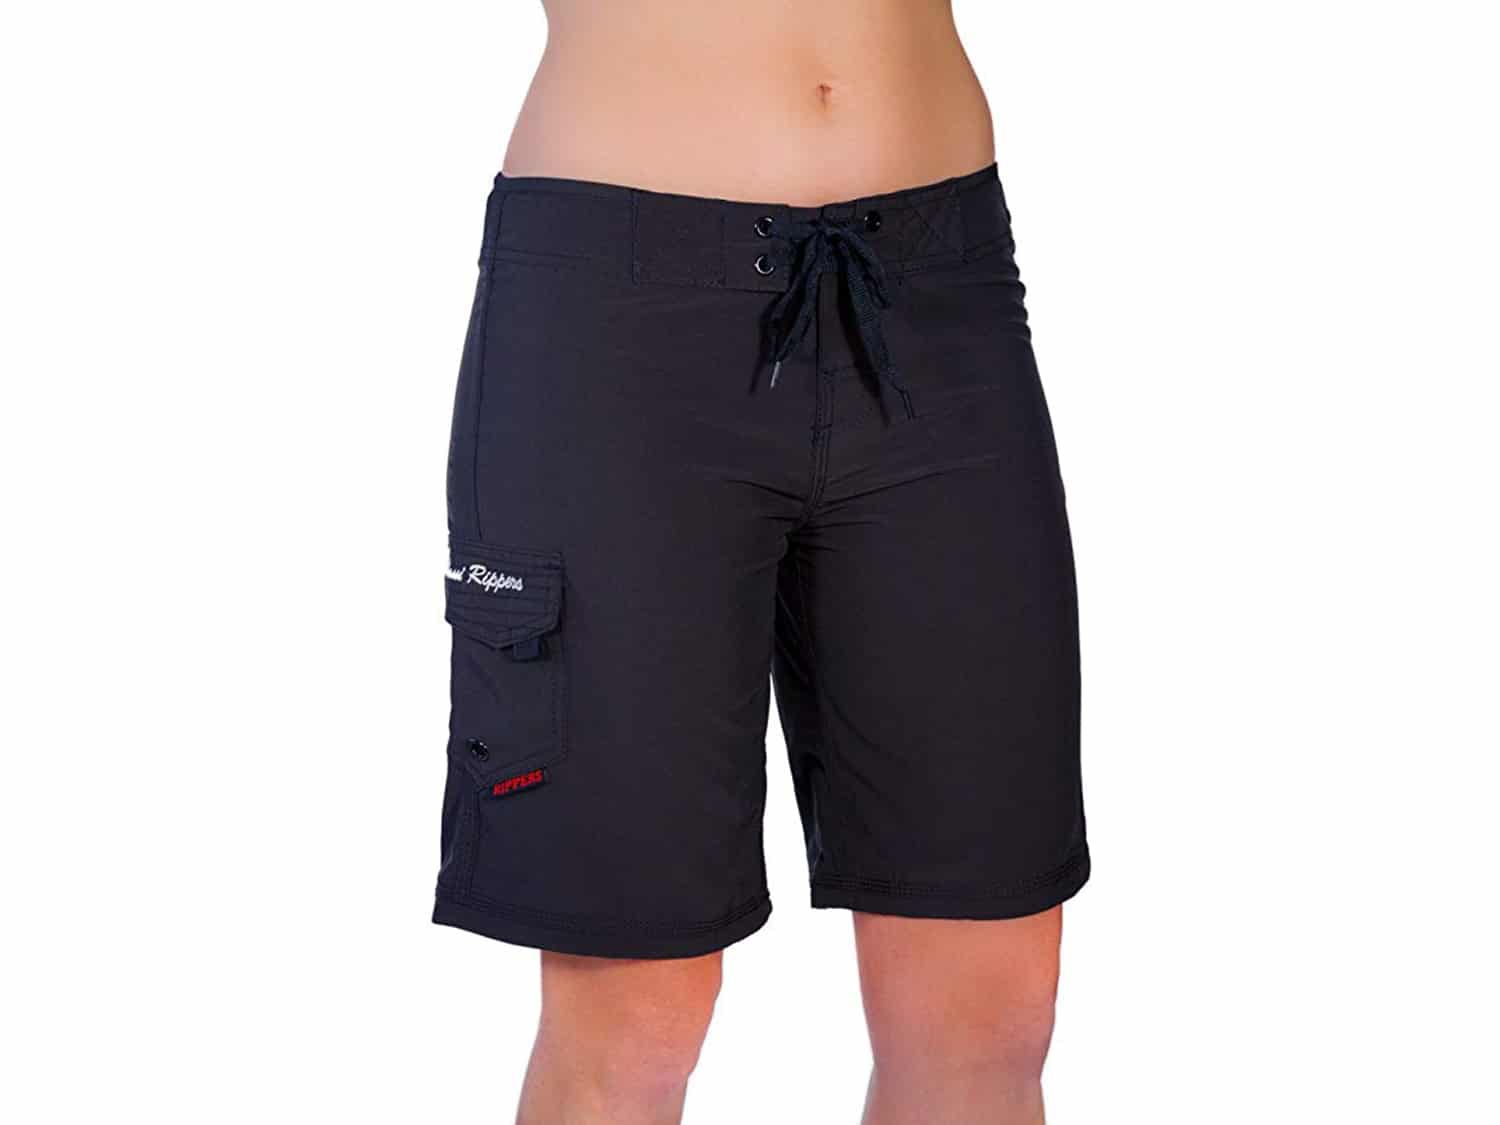 Maui Rippers Women's 4-Way Stretch 9